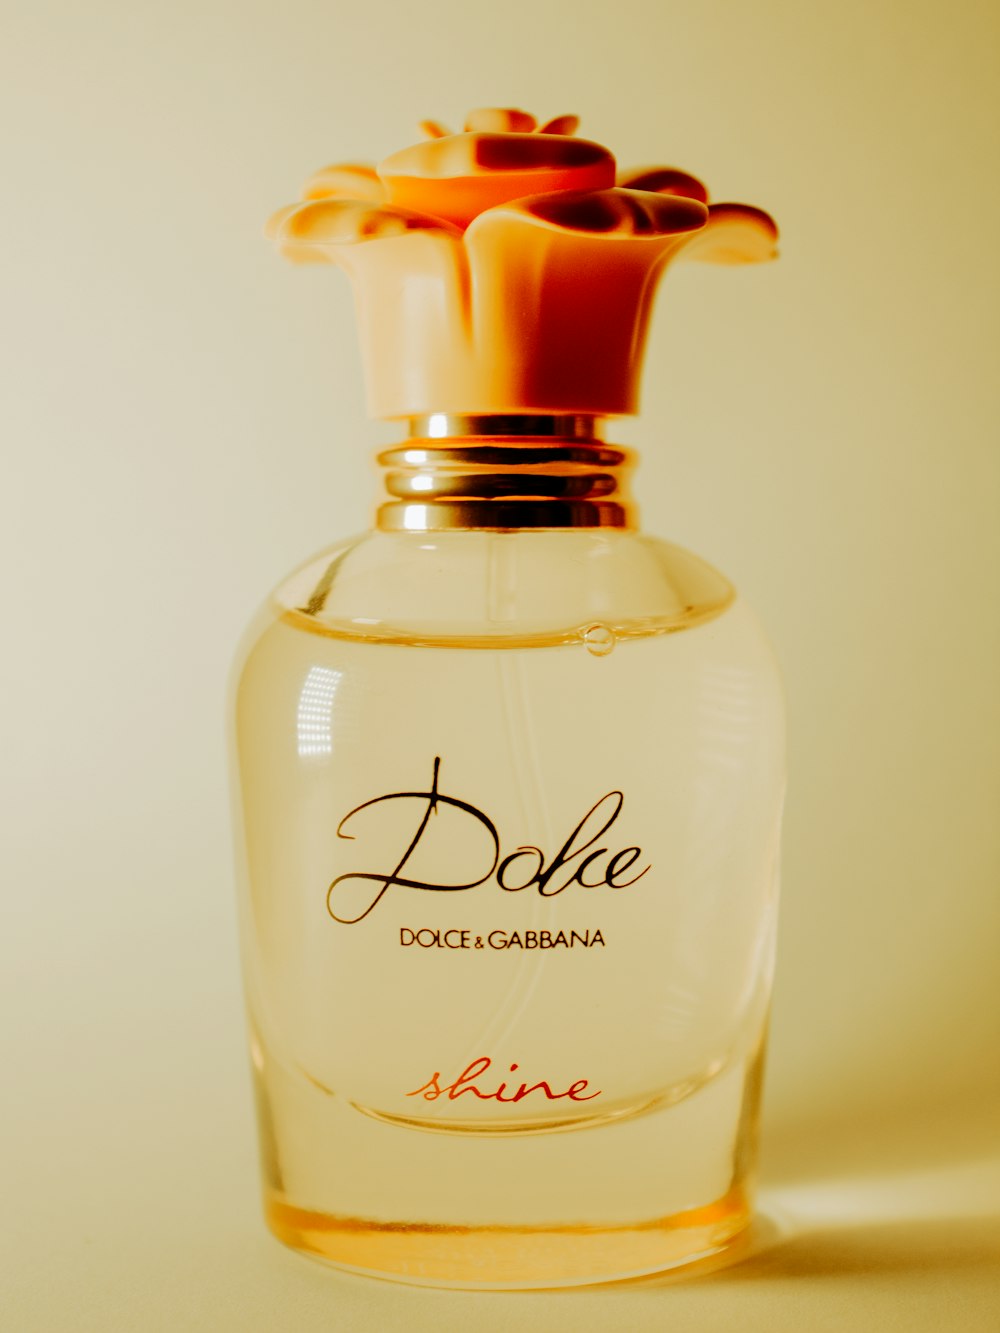 a close up of a bottle of perfume